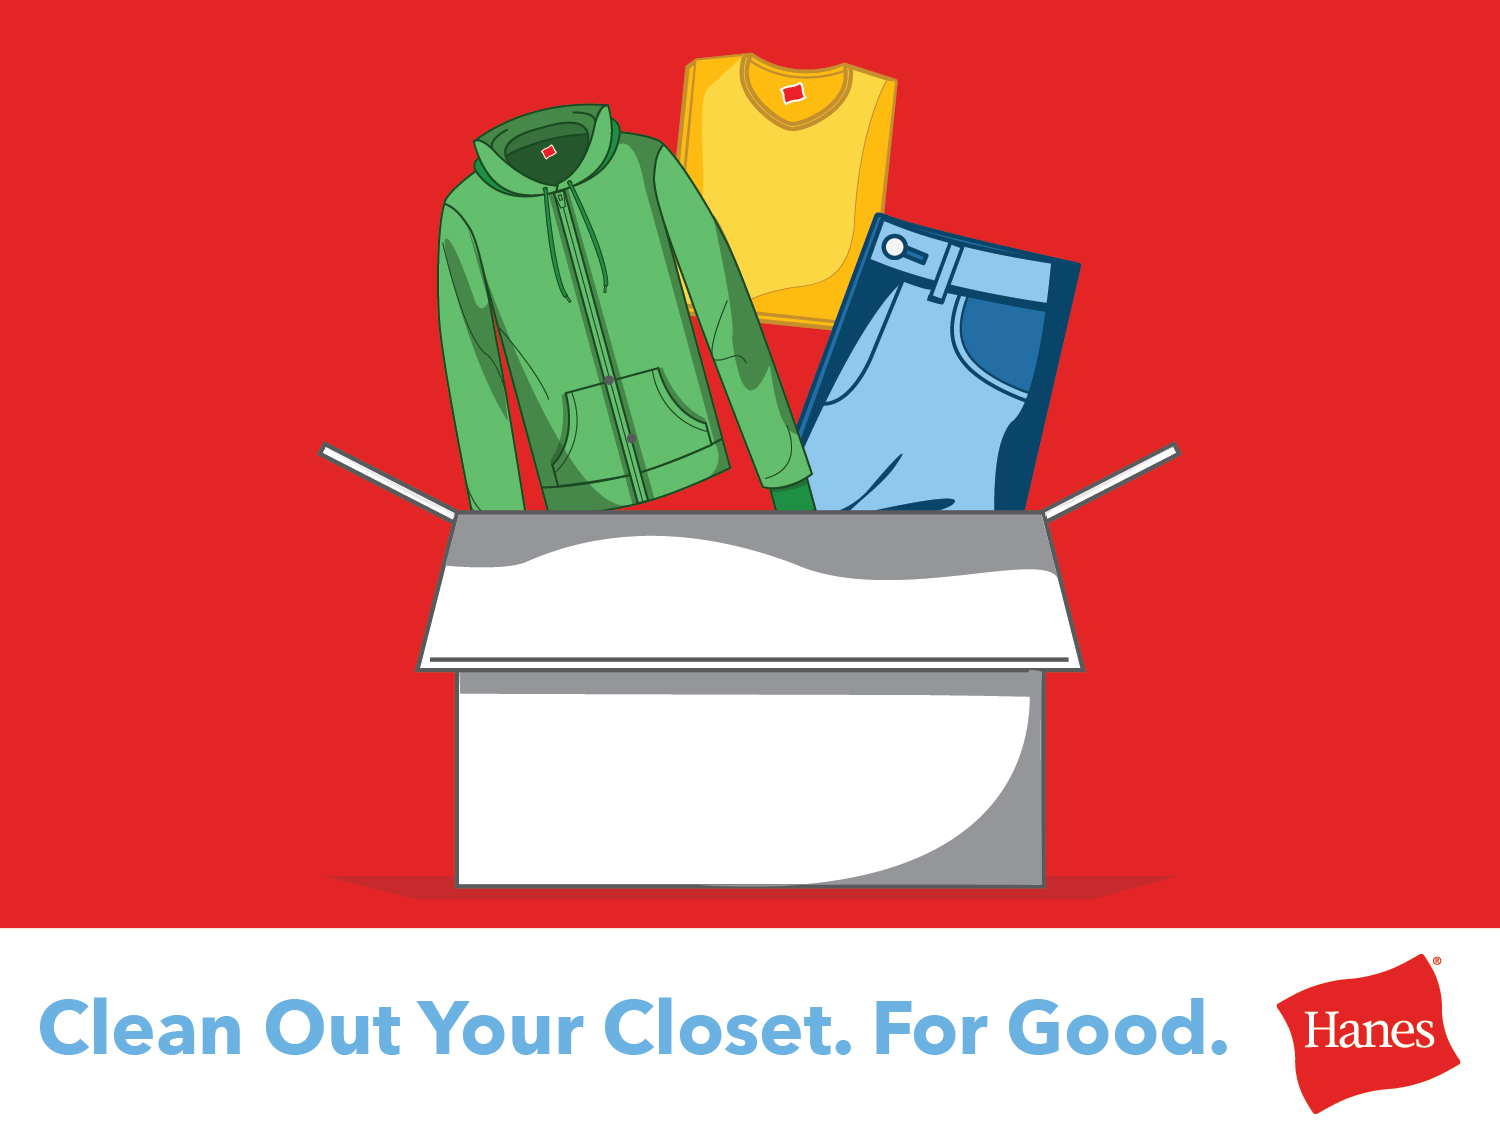 Give new life to your old clothes through this Earth Day project with Hanes and Give Back Box.